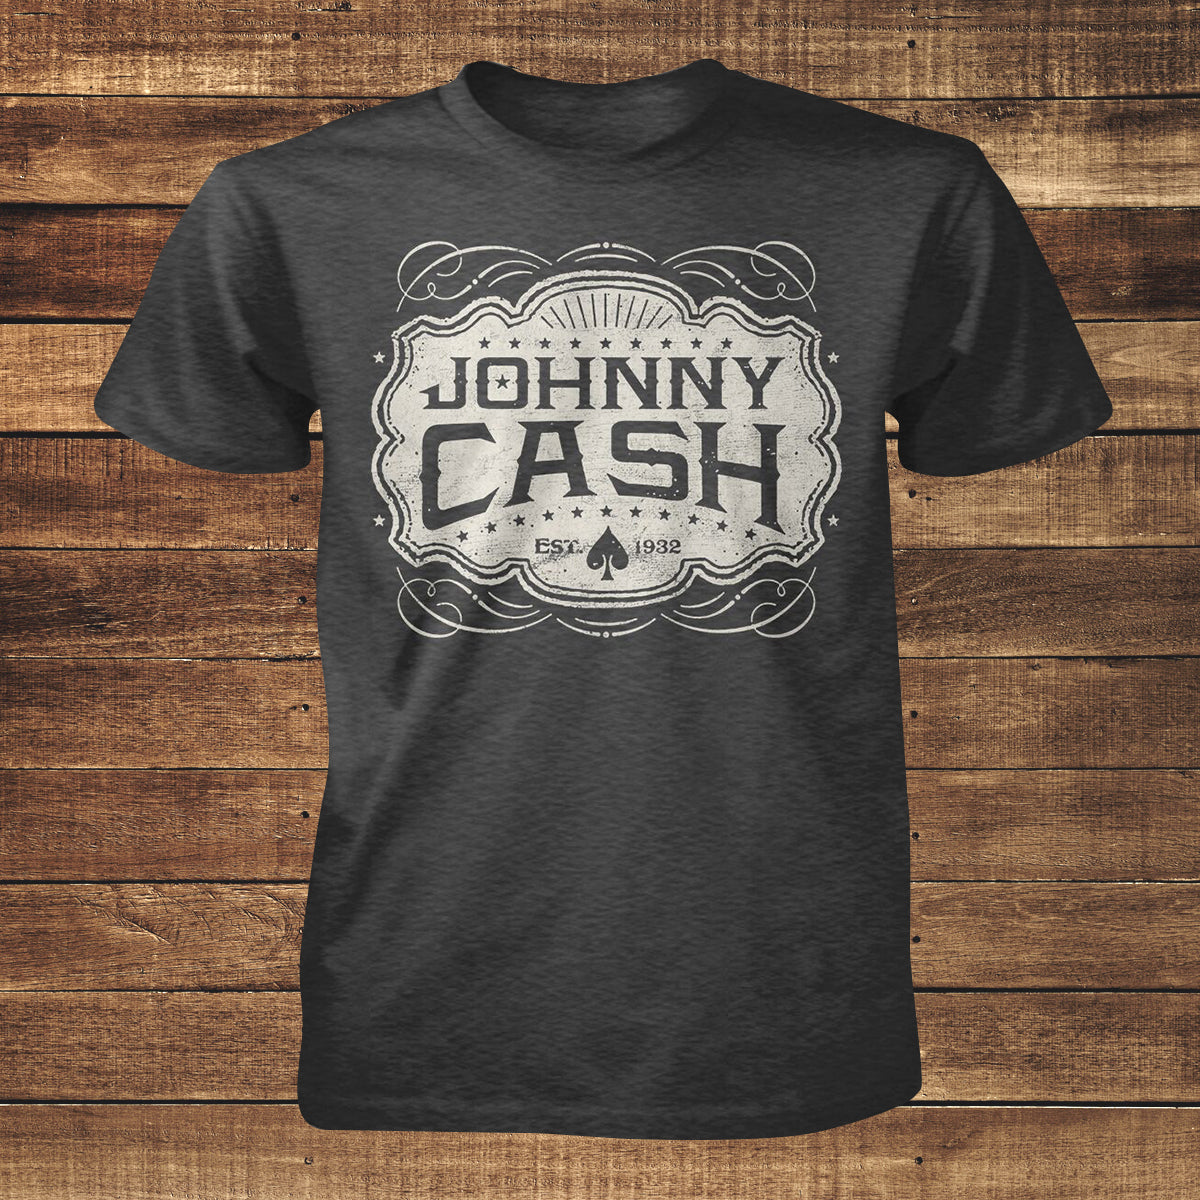 What Are The Best Materials For Johnny Cash Shirts?